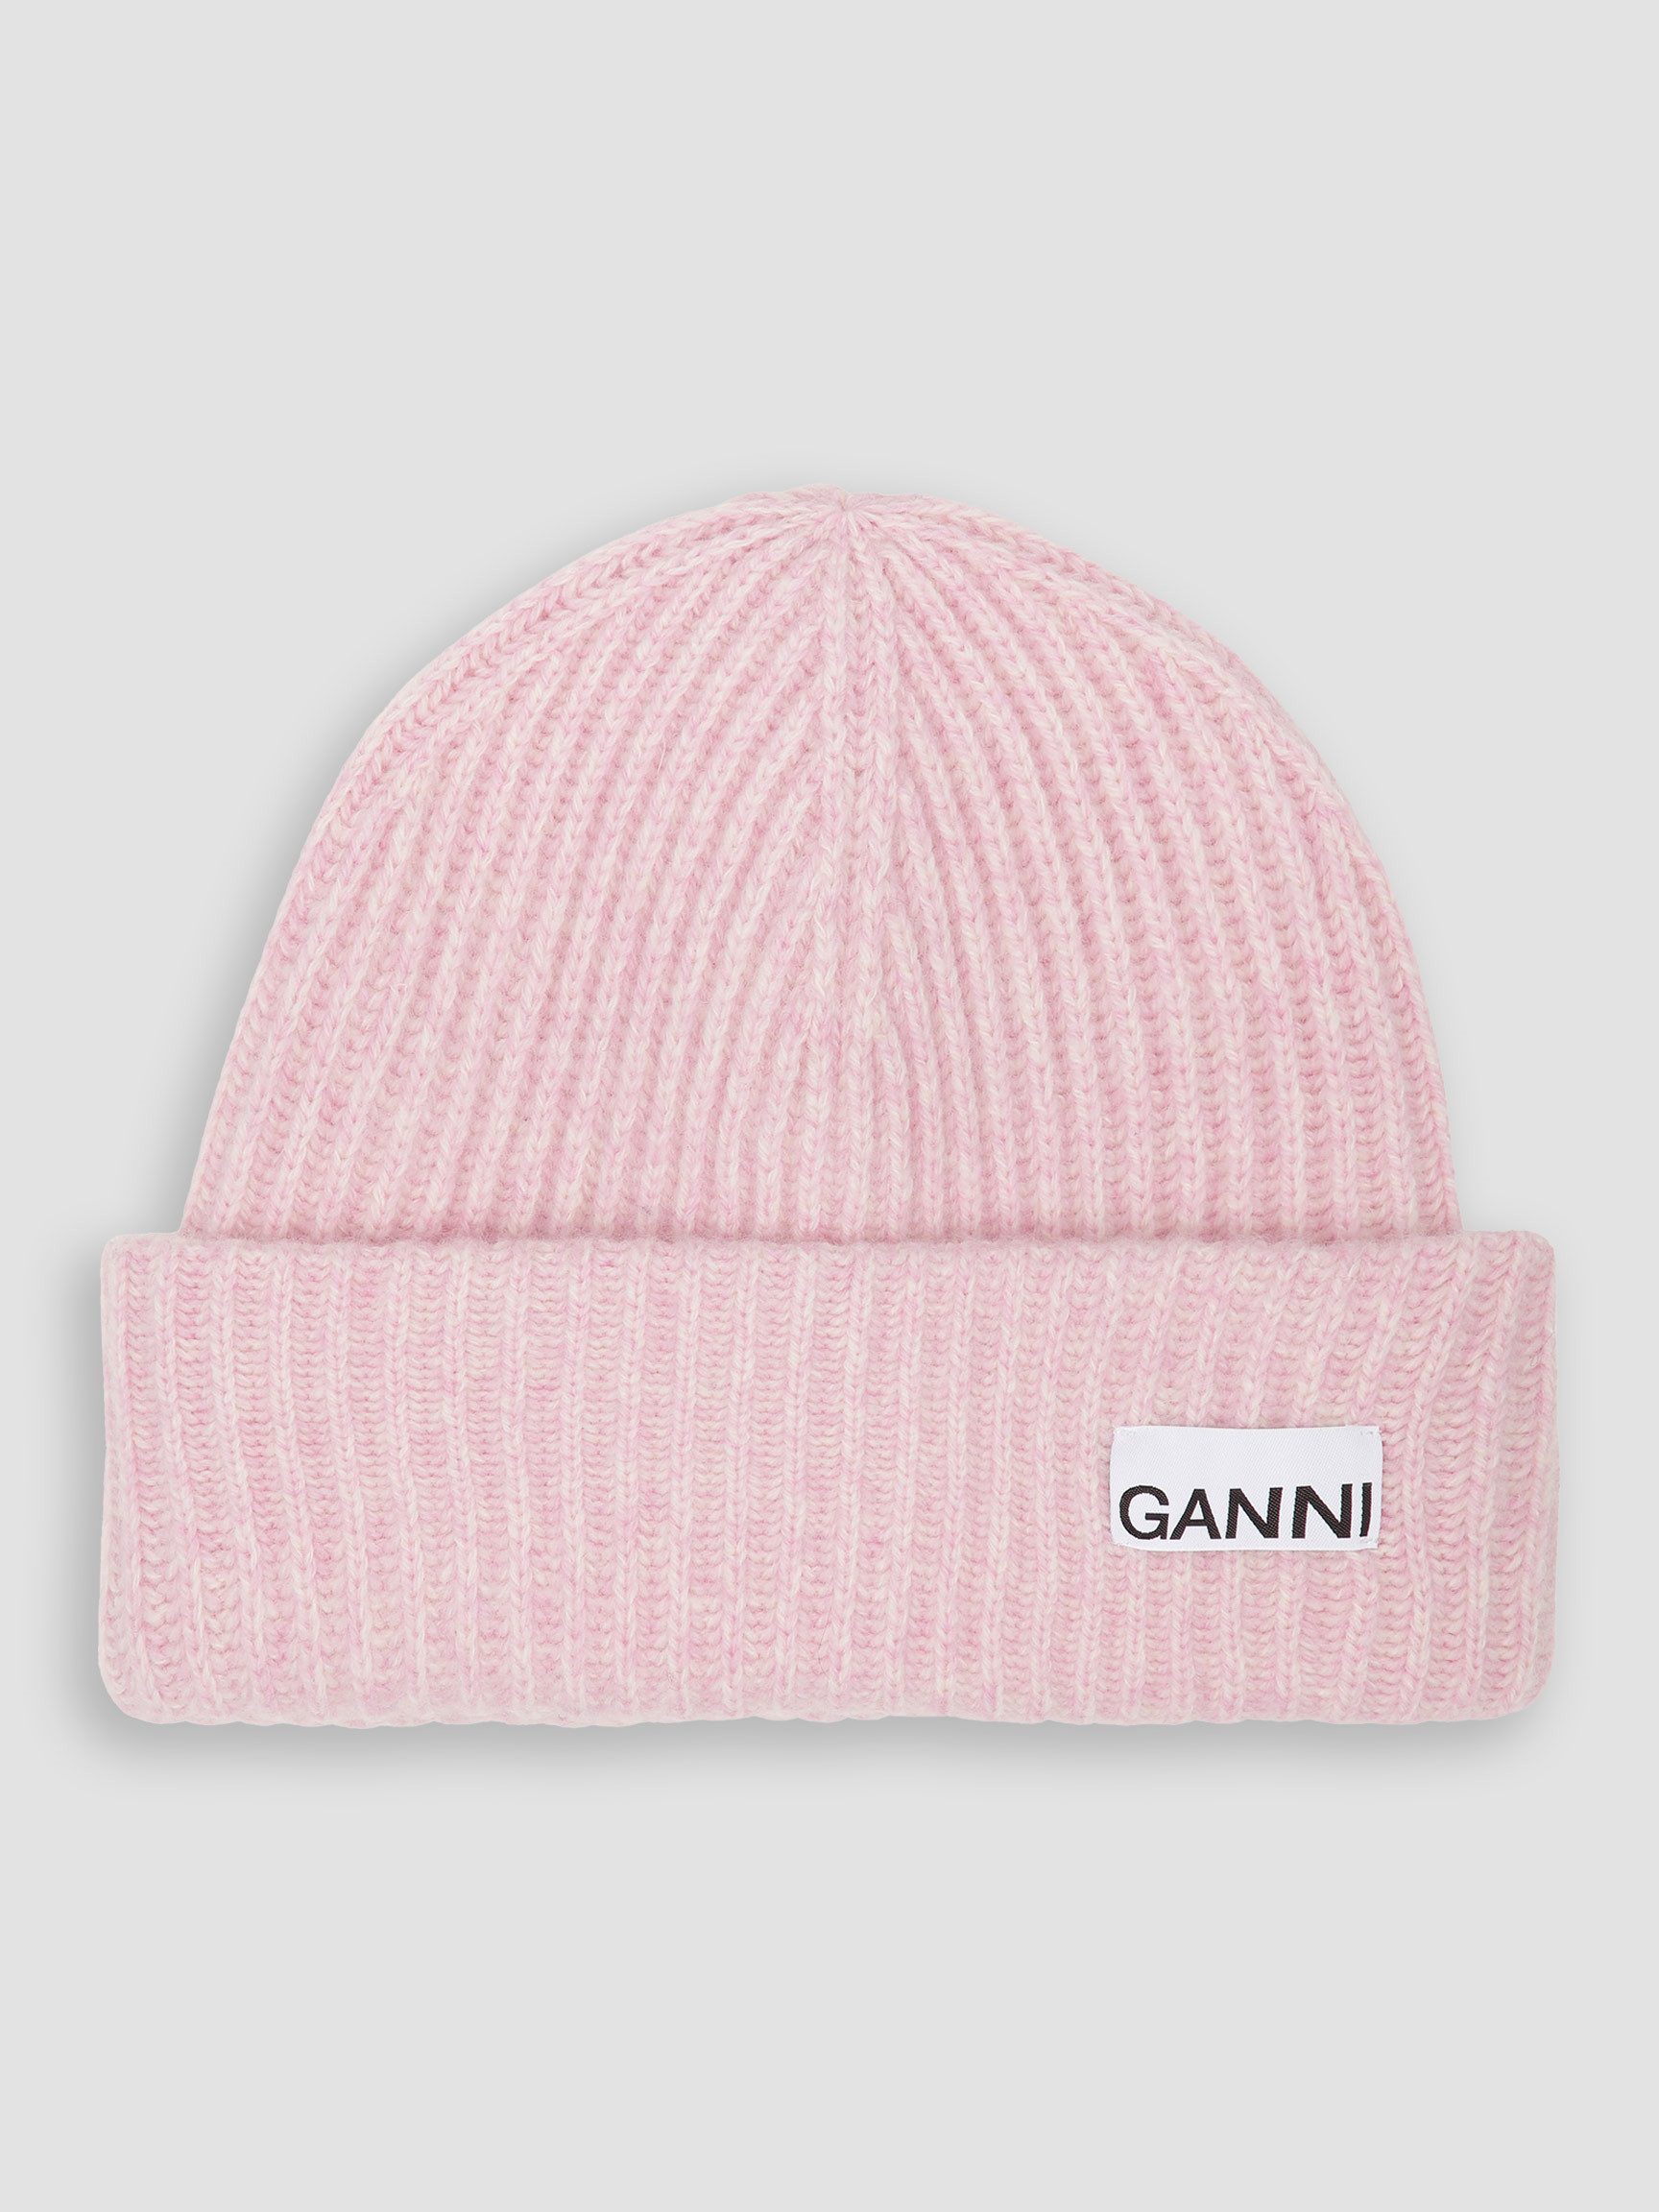 GANNI | ACCESSORIES | HATS AND BEANIES